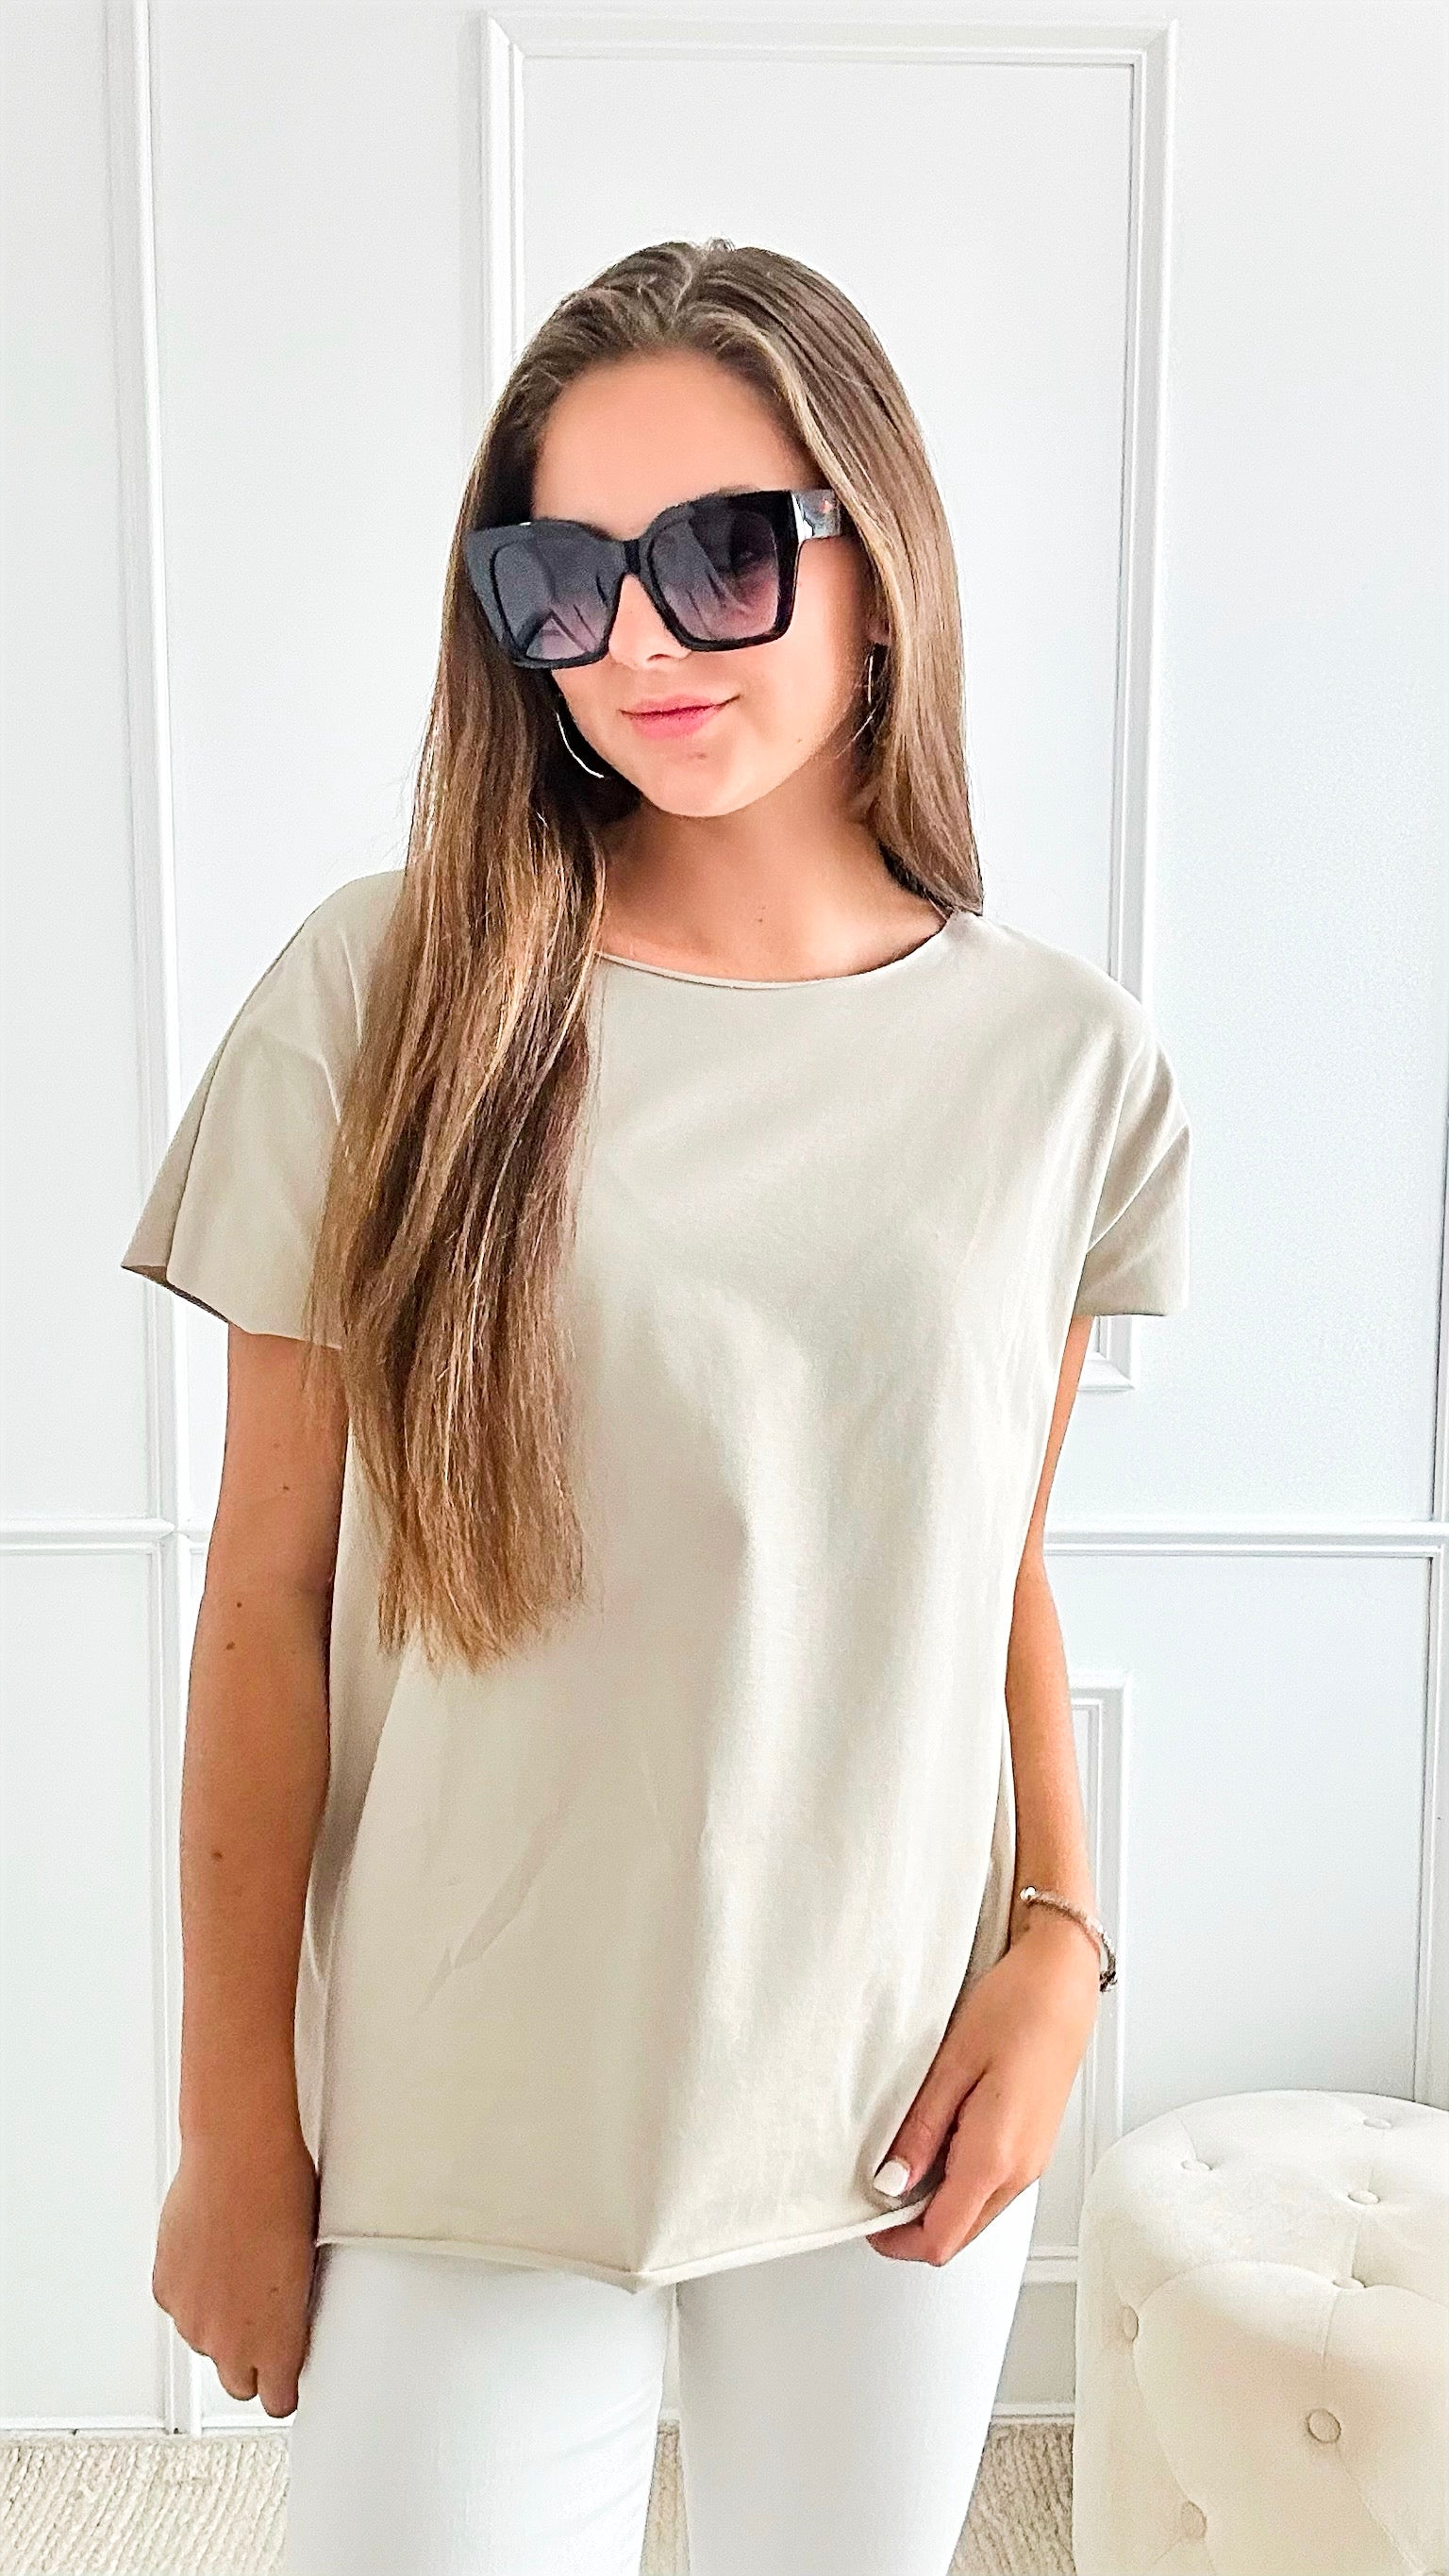 Easy Breezy Italian tee - Beige-110 Short Sleeve Tops-Italianissimo-Coastal Bloom Boutique, find the trendiest versions of the popular styles and looks Located in Indialantic, FL